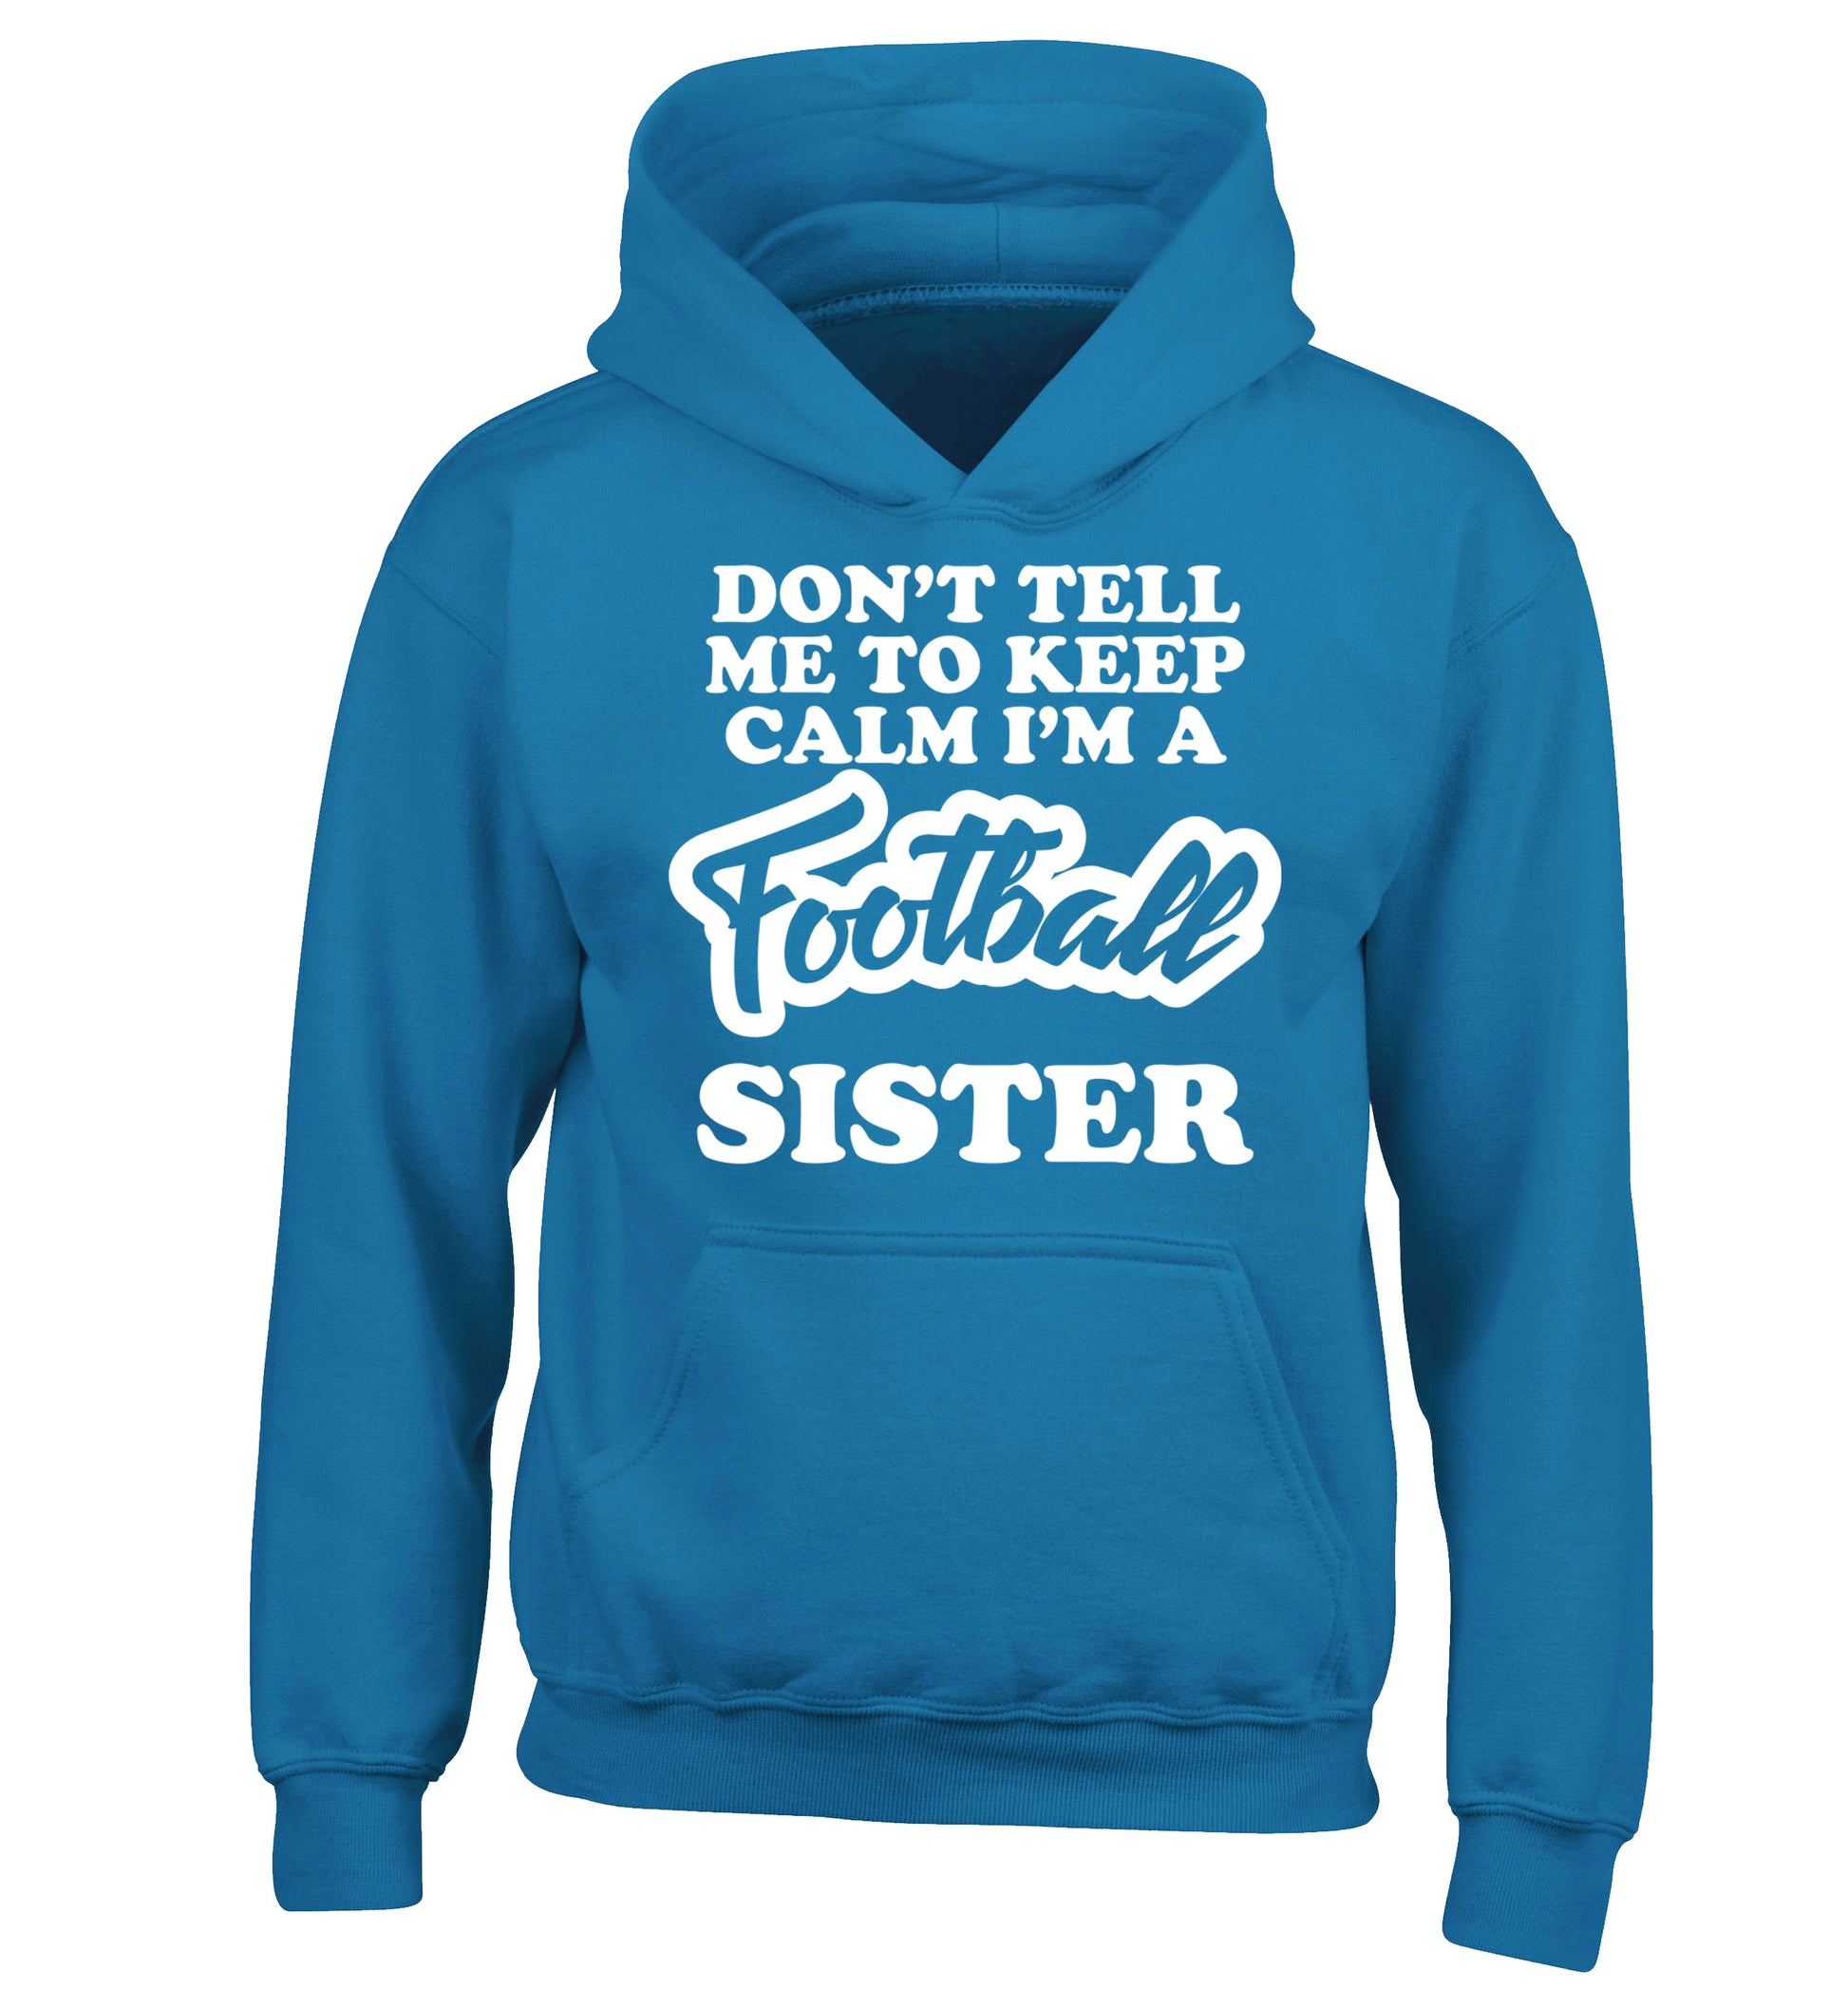 Don't tell me to keep calm I'm a football sister children's blue hoodie 12-14 Years